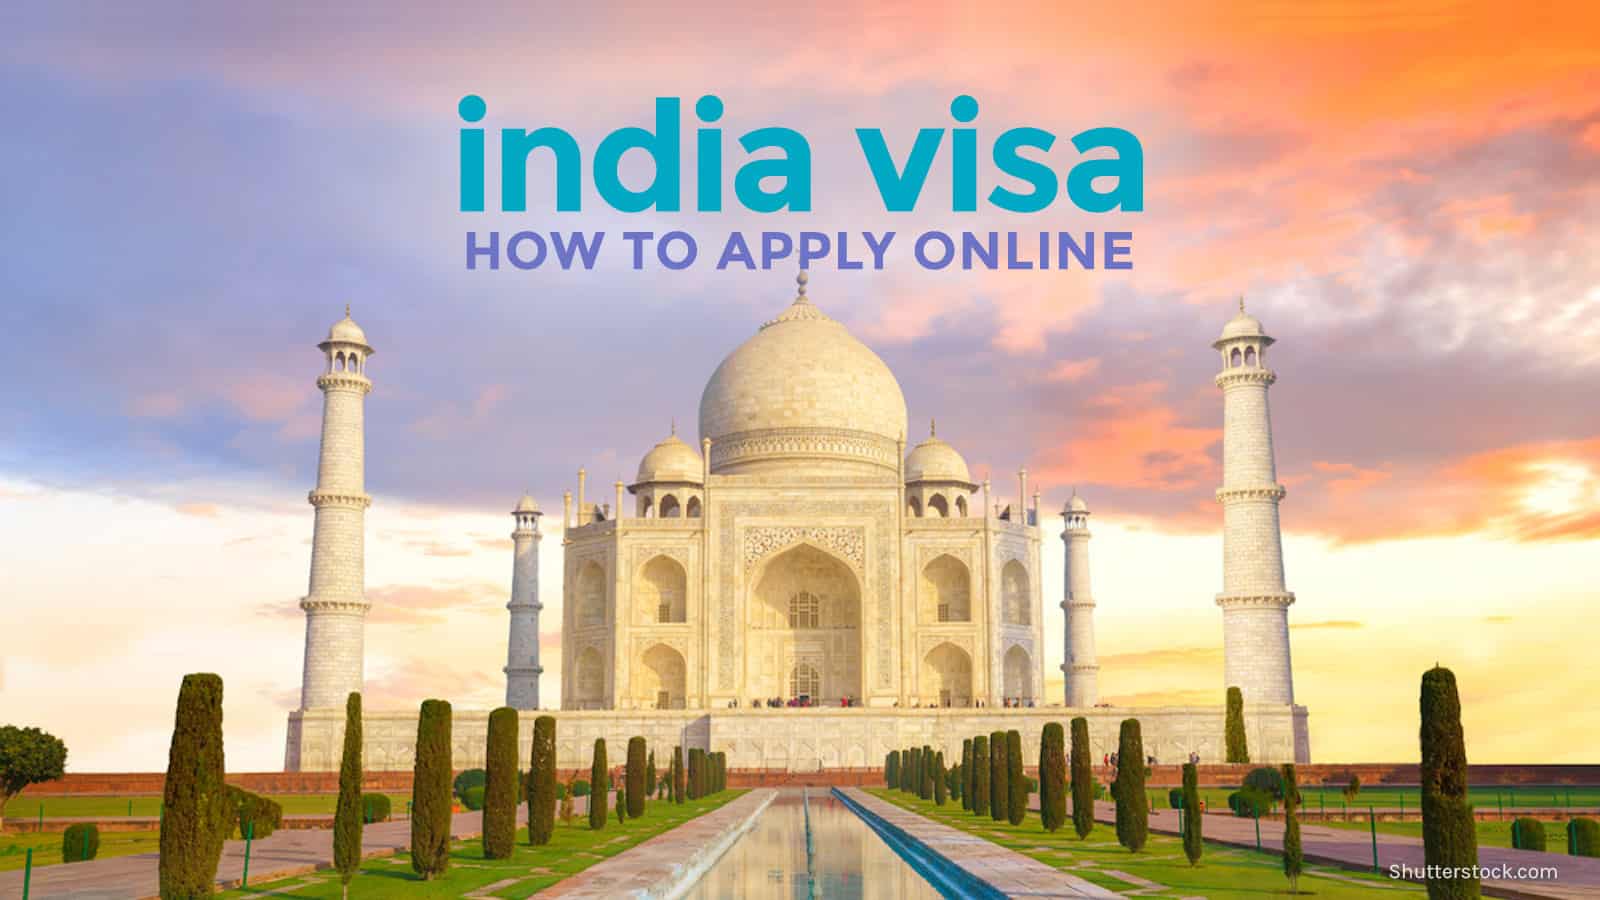 INDIA VISA REQUIREMENTS & Online Application for Filipinos